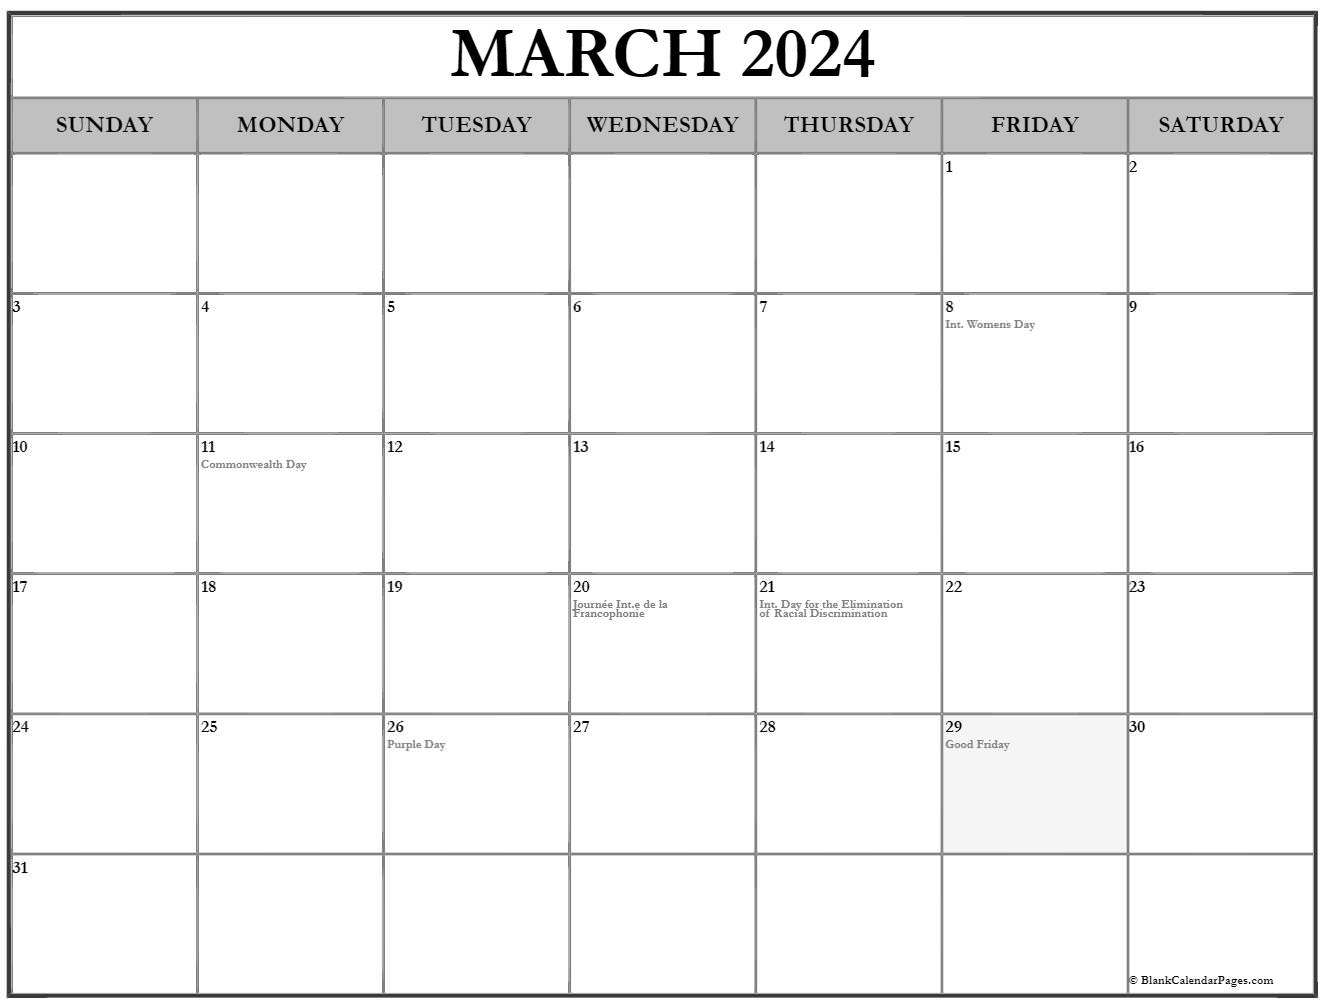 March 2024 Uk Calendar With Holidays For Printing Ima vrogue.co